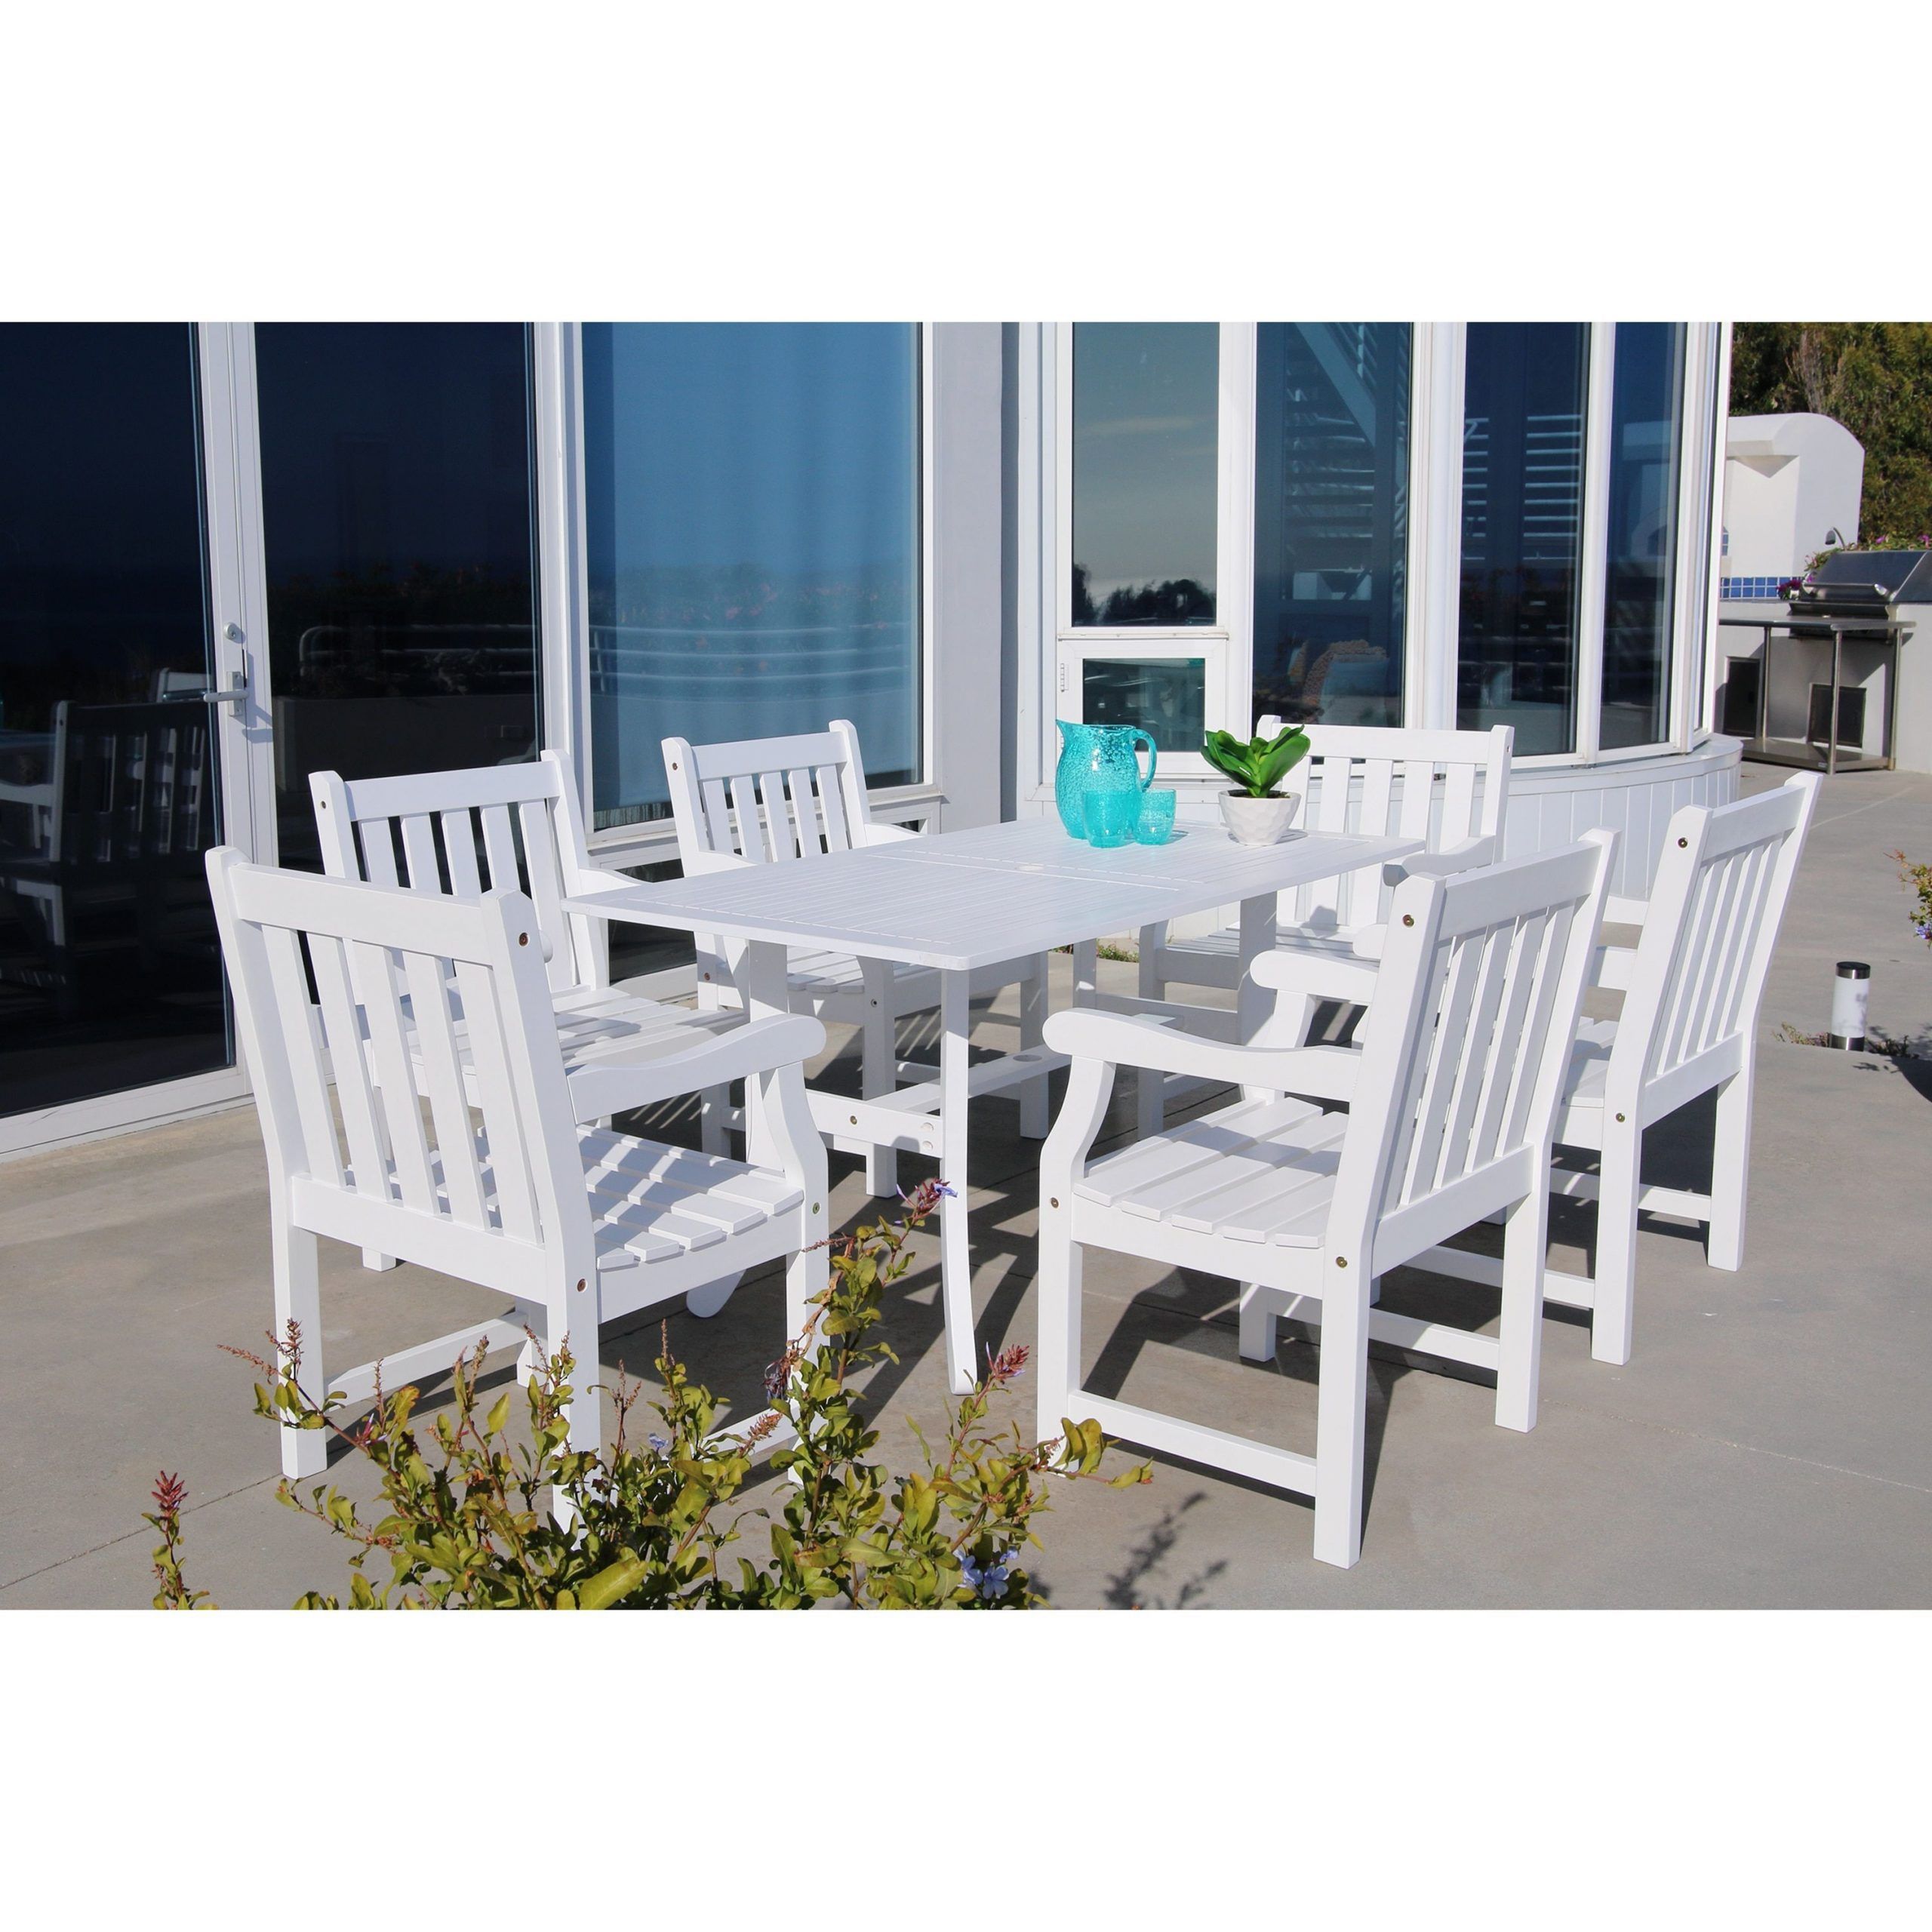 Bradley Eco Friendly 7 Piece Outdoor White Hardwood Dining Set With With Regard To Most Popular White Rectangular Patio Dining Sets (View 14 of 15)